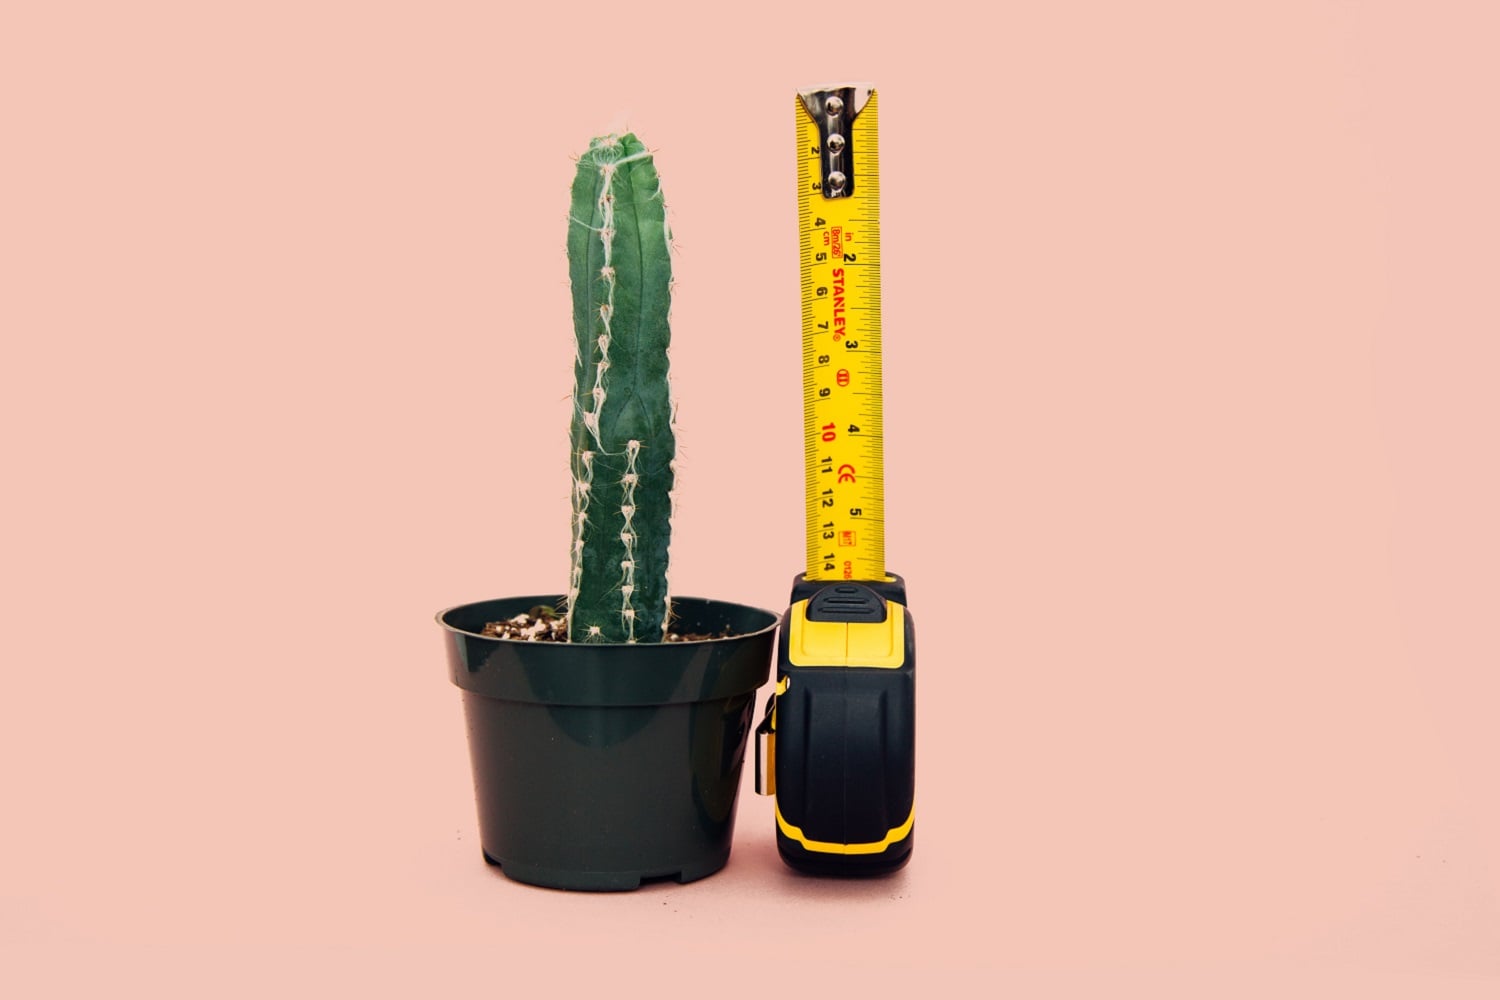 A tape measure being used to measure the length of a phallic-looking cactus.